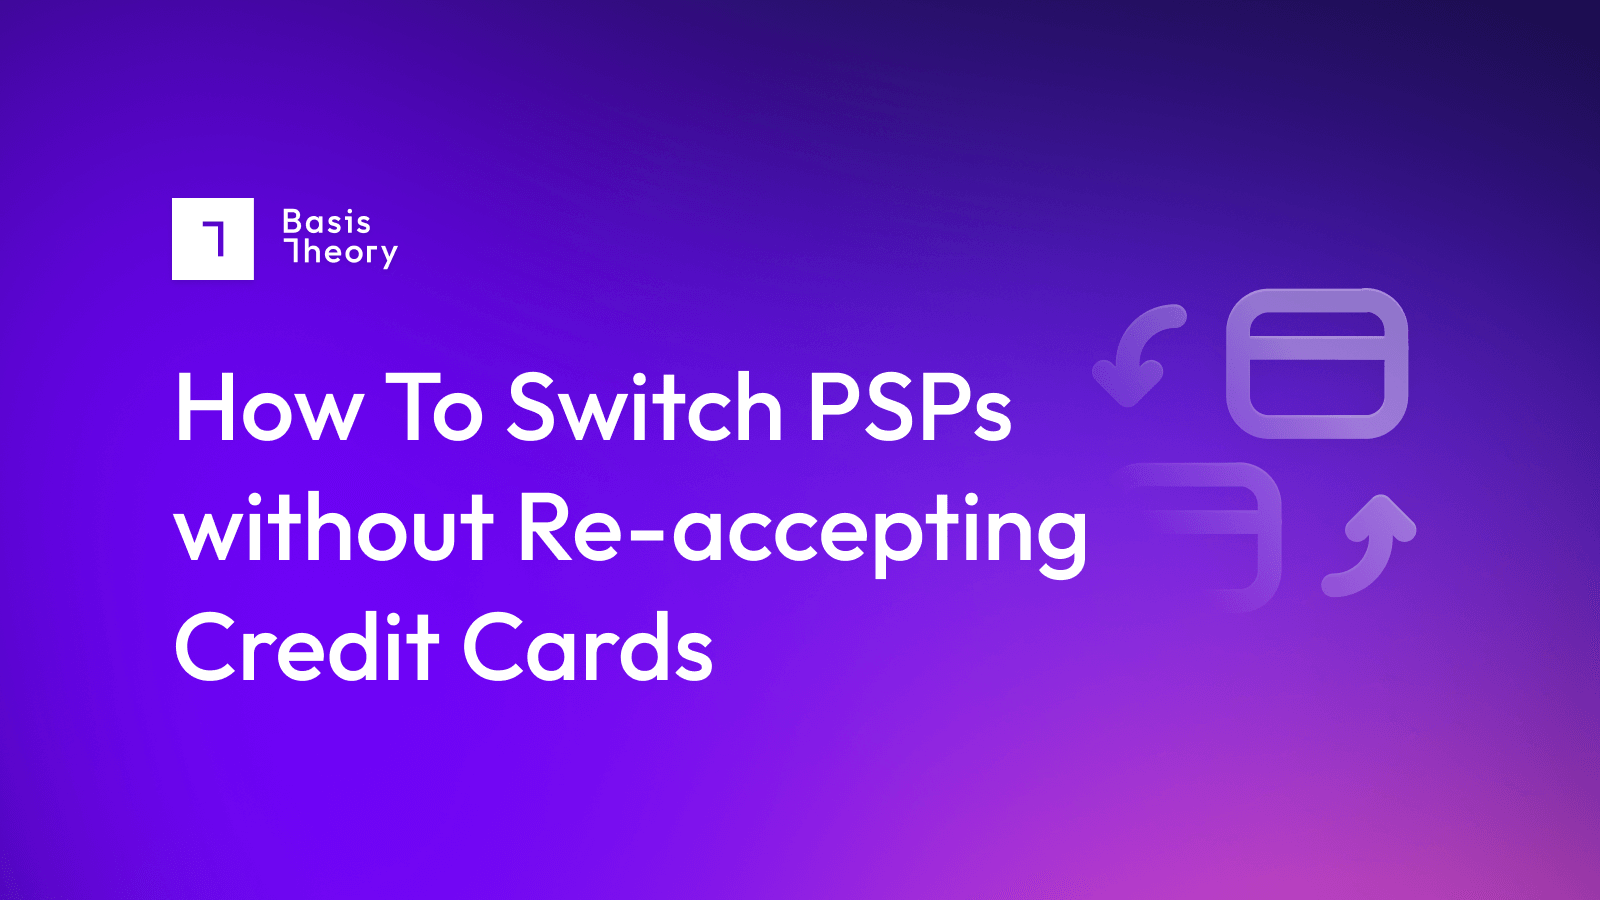 How to switch PSPs without re-accepting cards